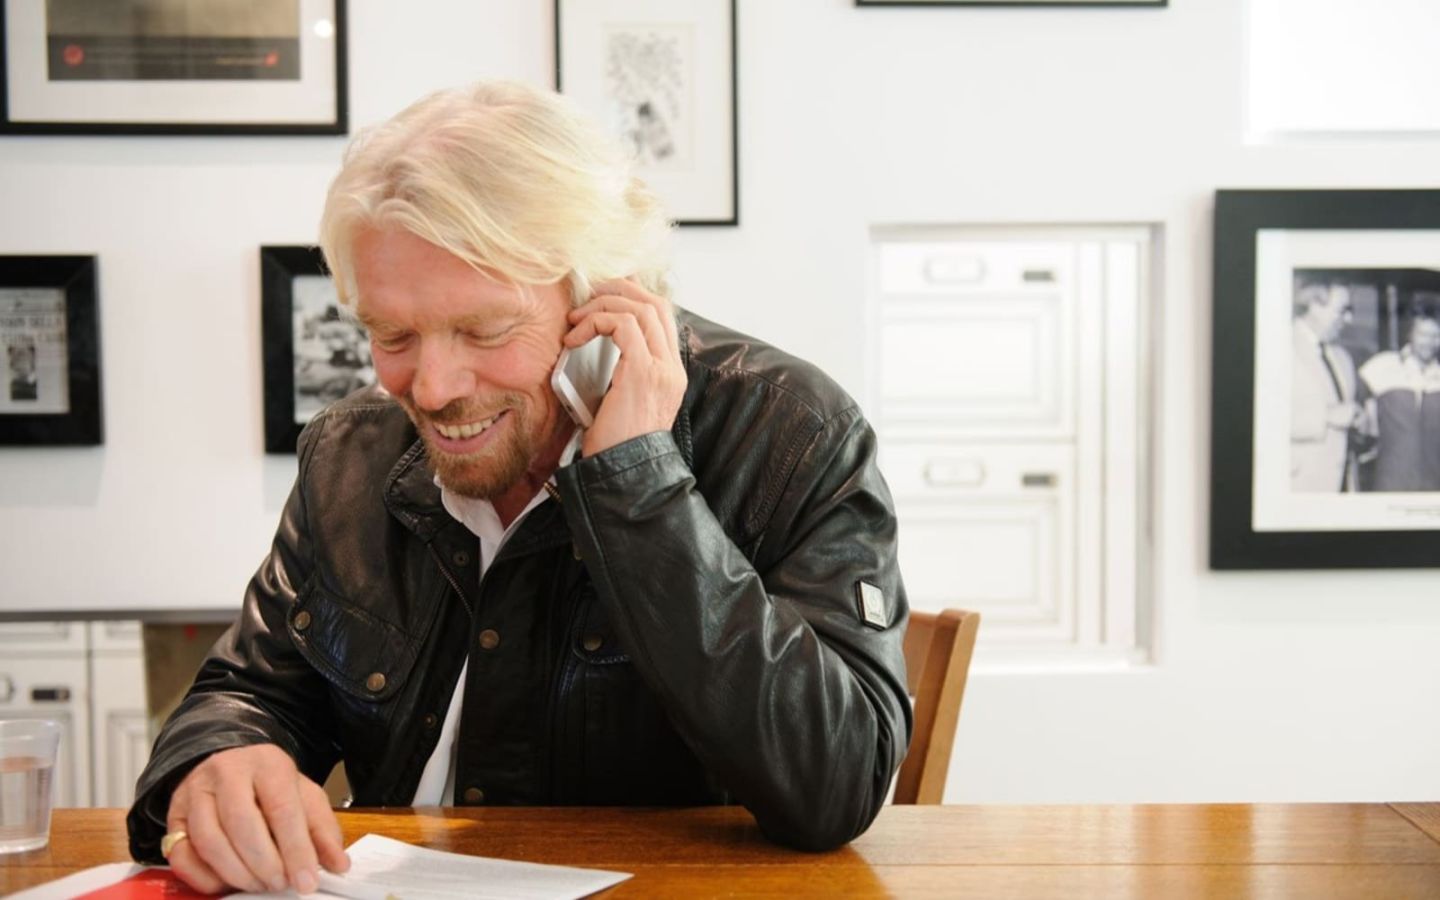 Richard Branson sitting at a table - talking on a mobile phone